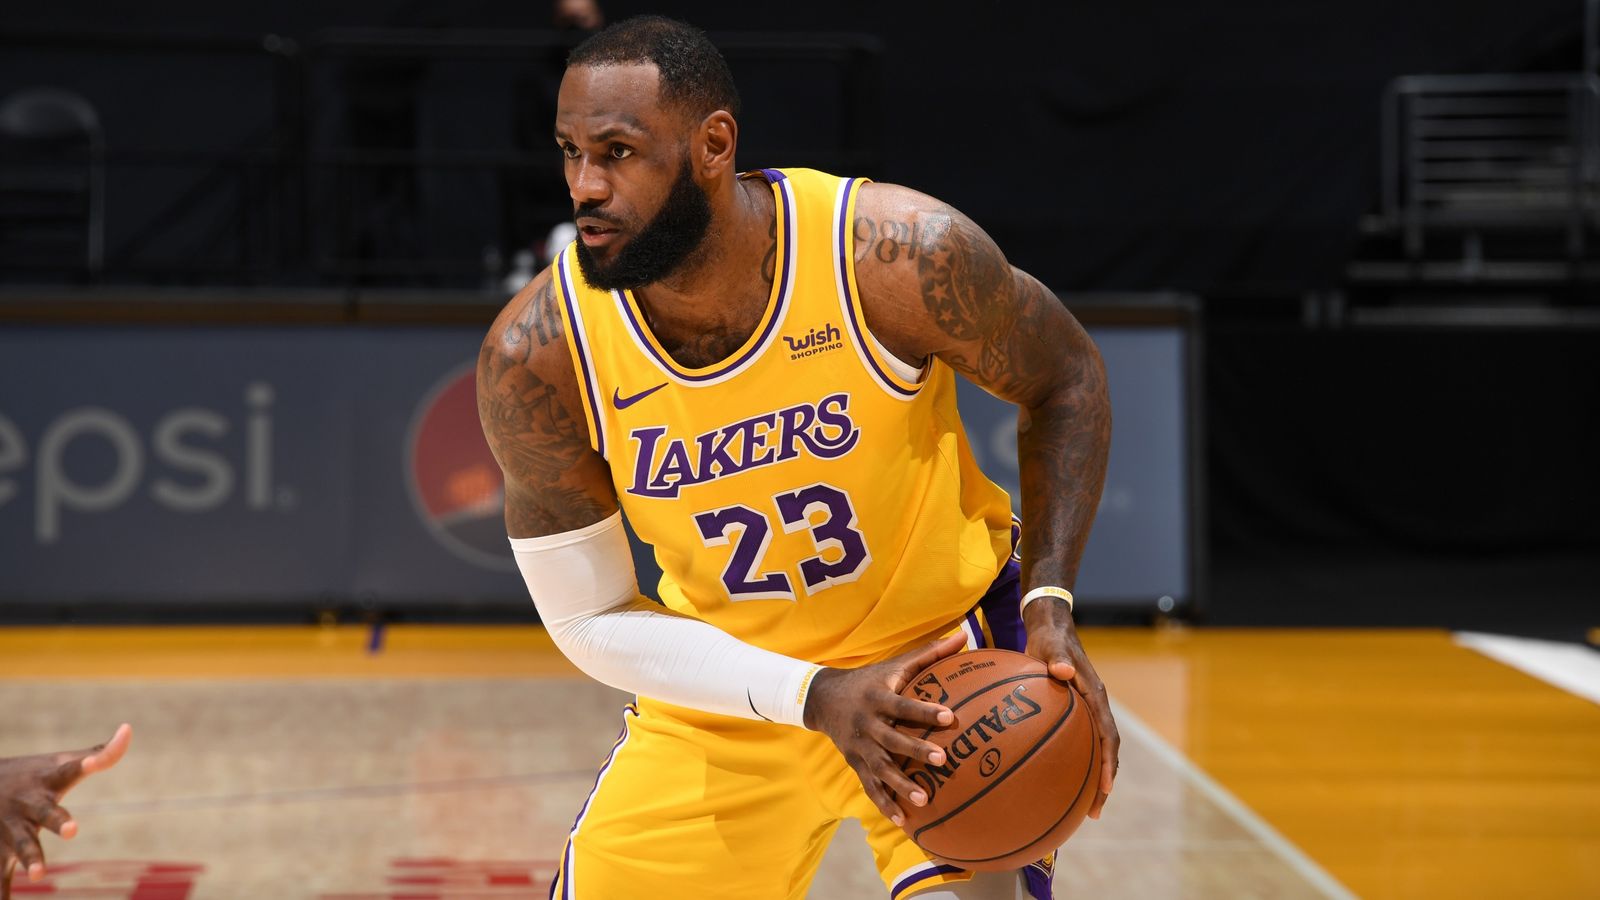 Los Angeles Lakers star LeBron James tops list of NBA players with